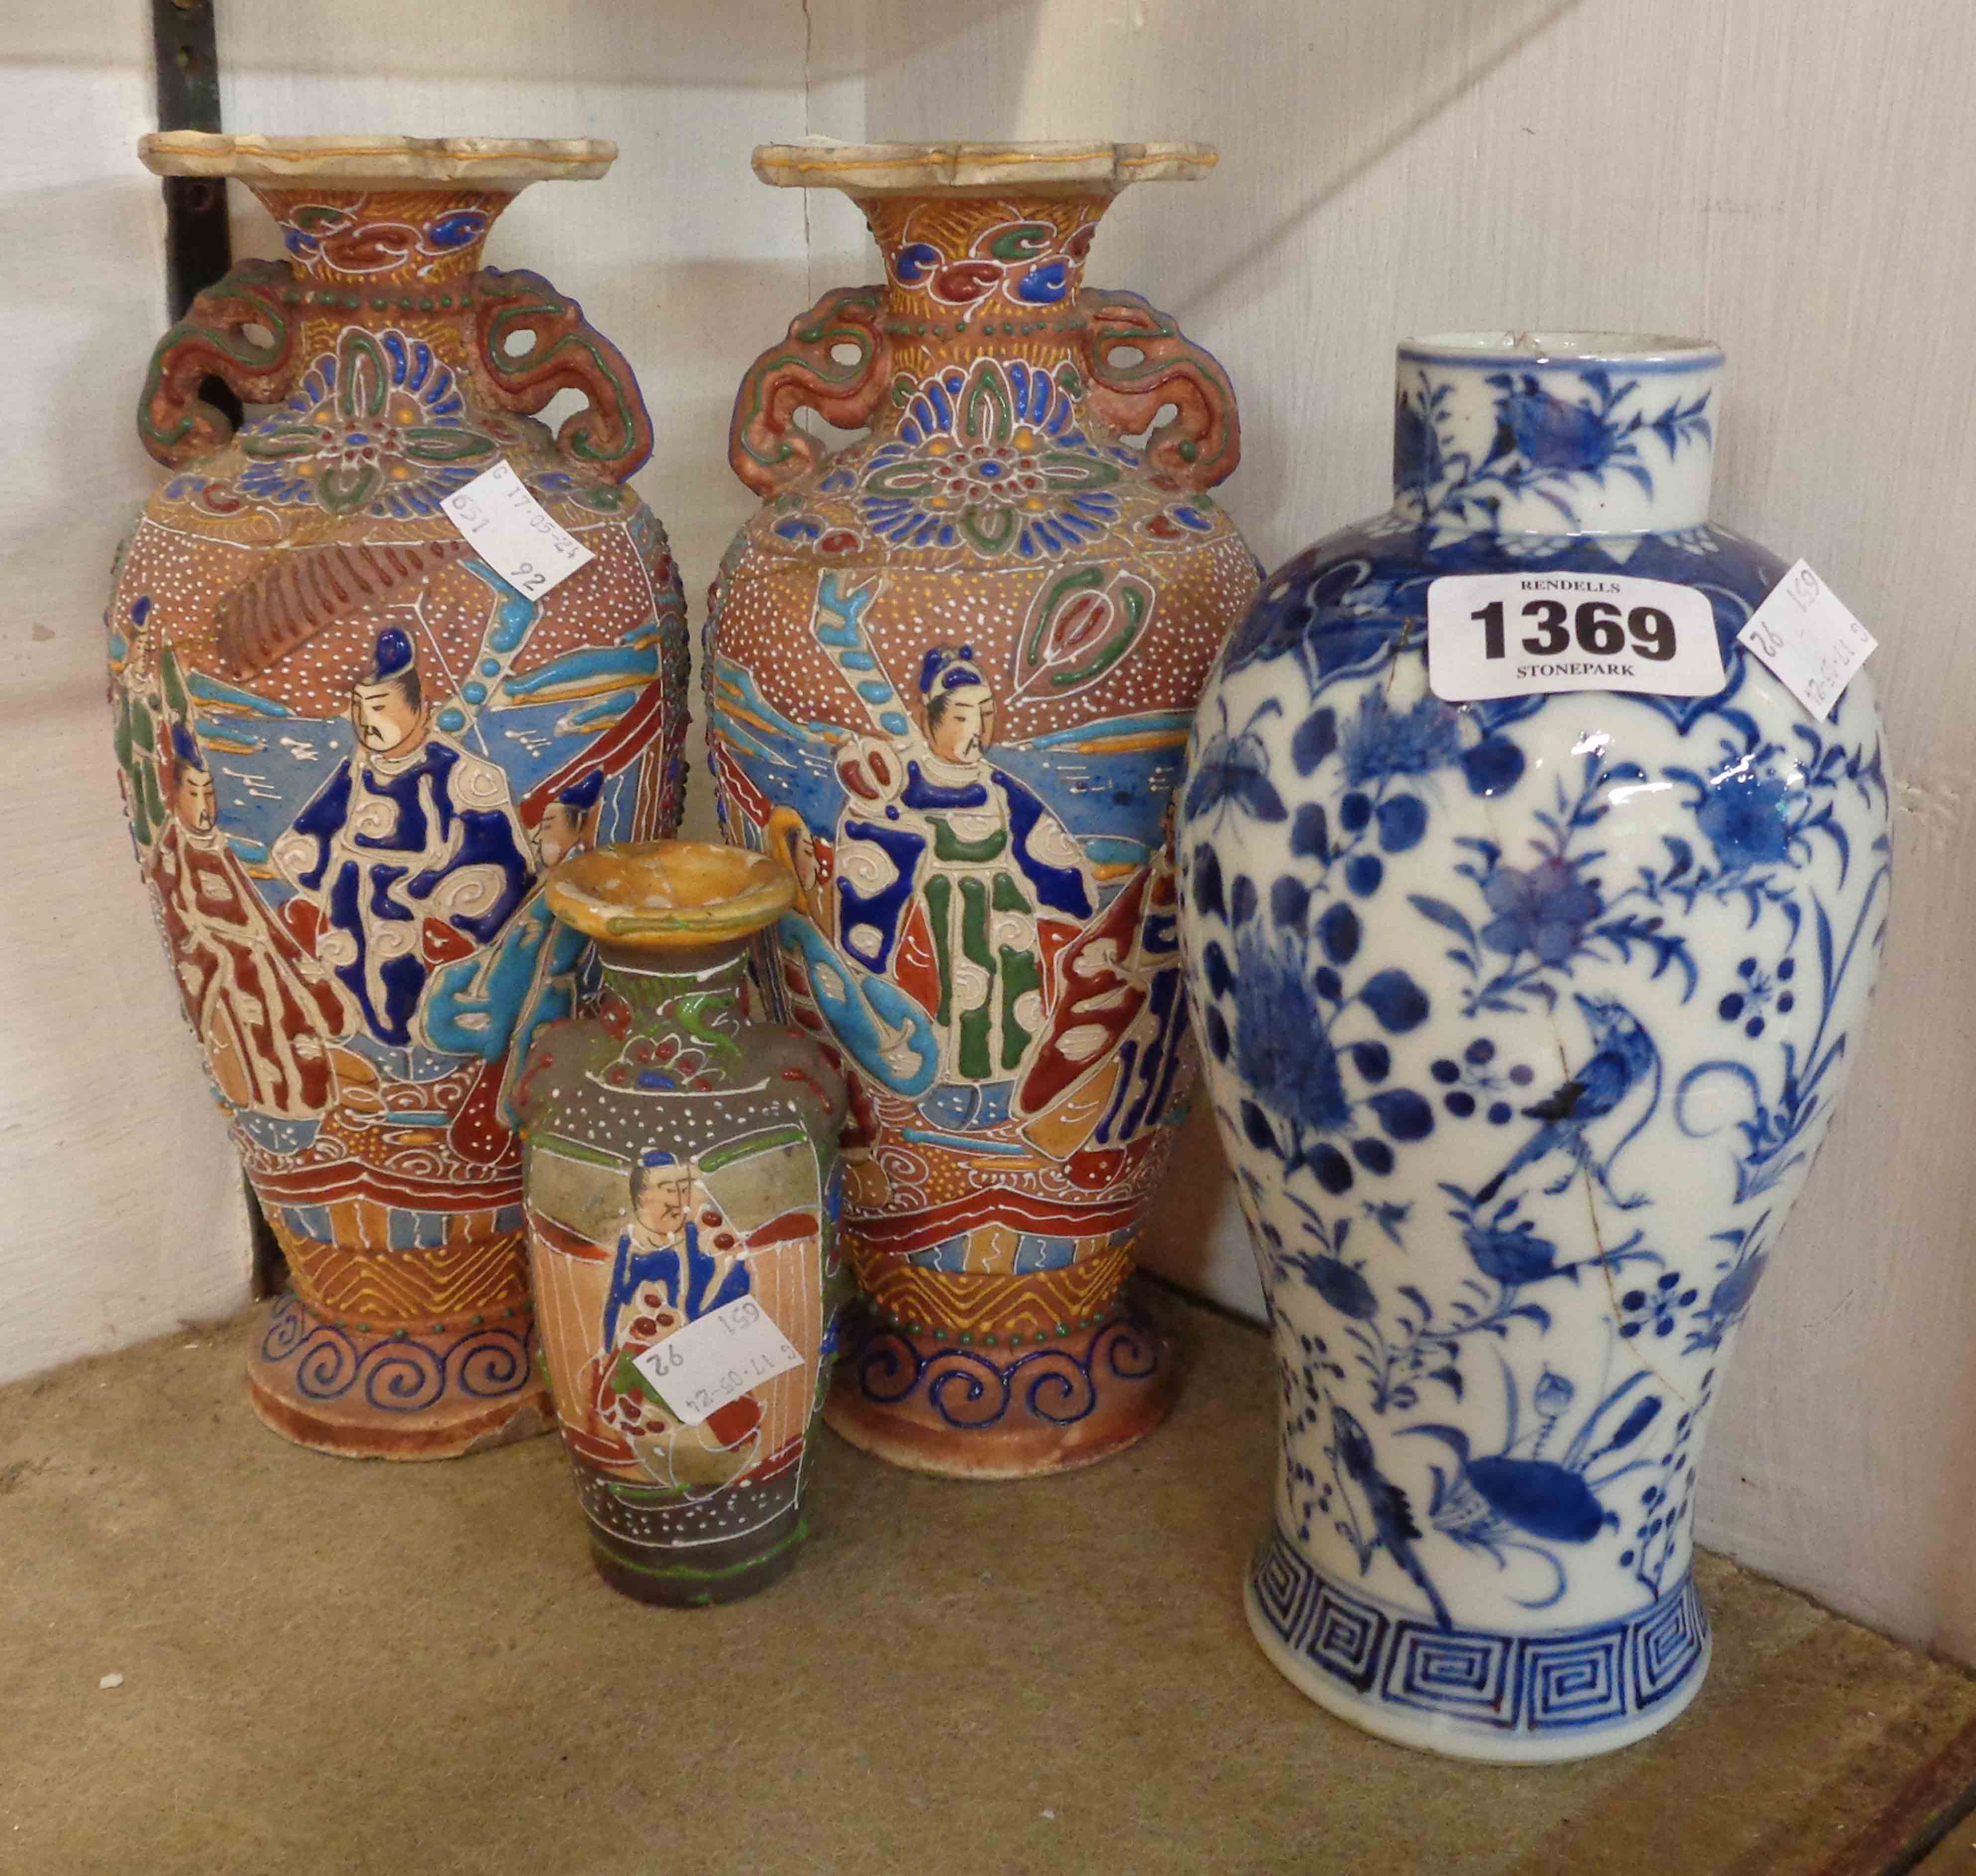 An antique Chinese porcelain vase with hand painted decoration in blue, depicting birds amidst